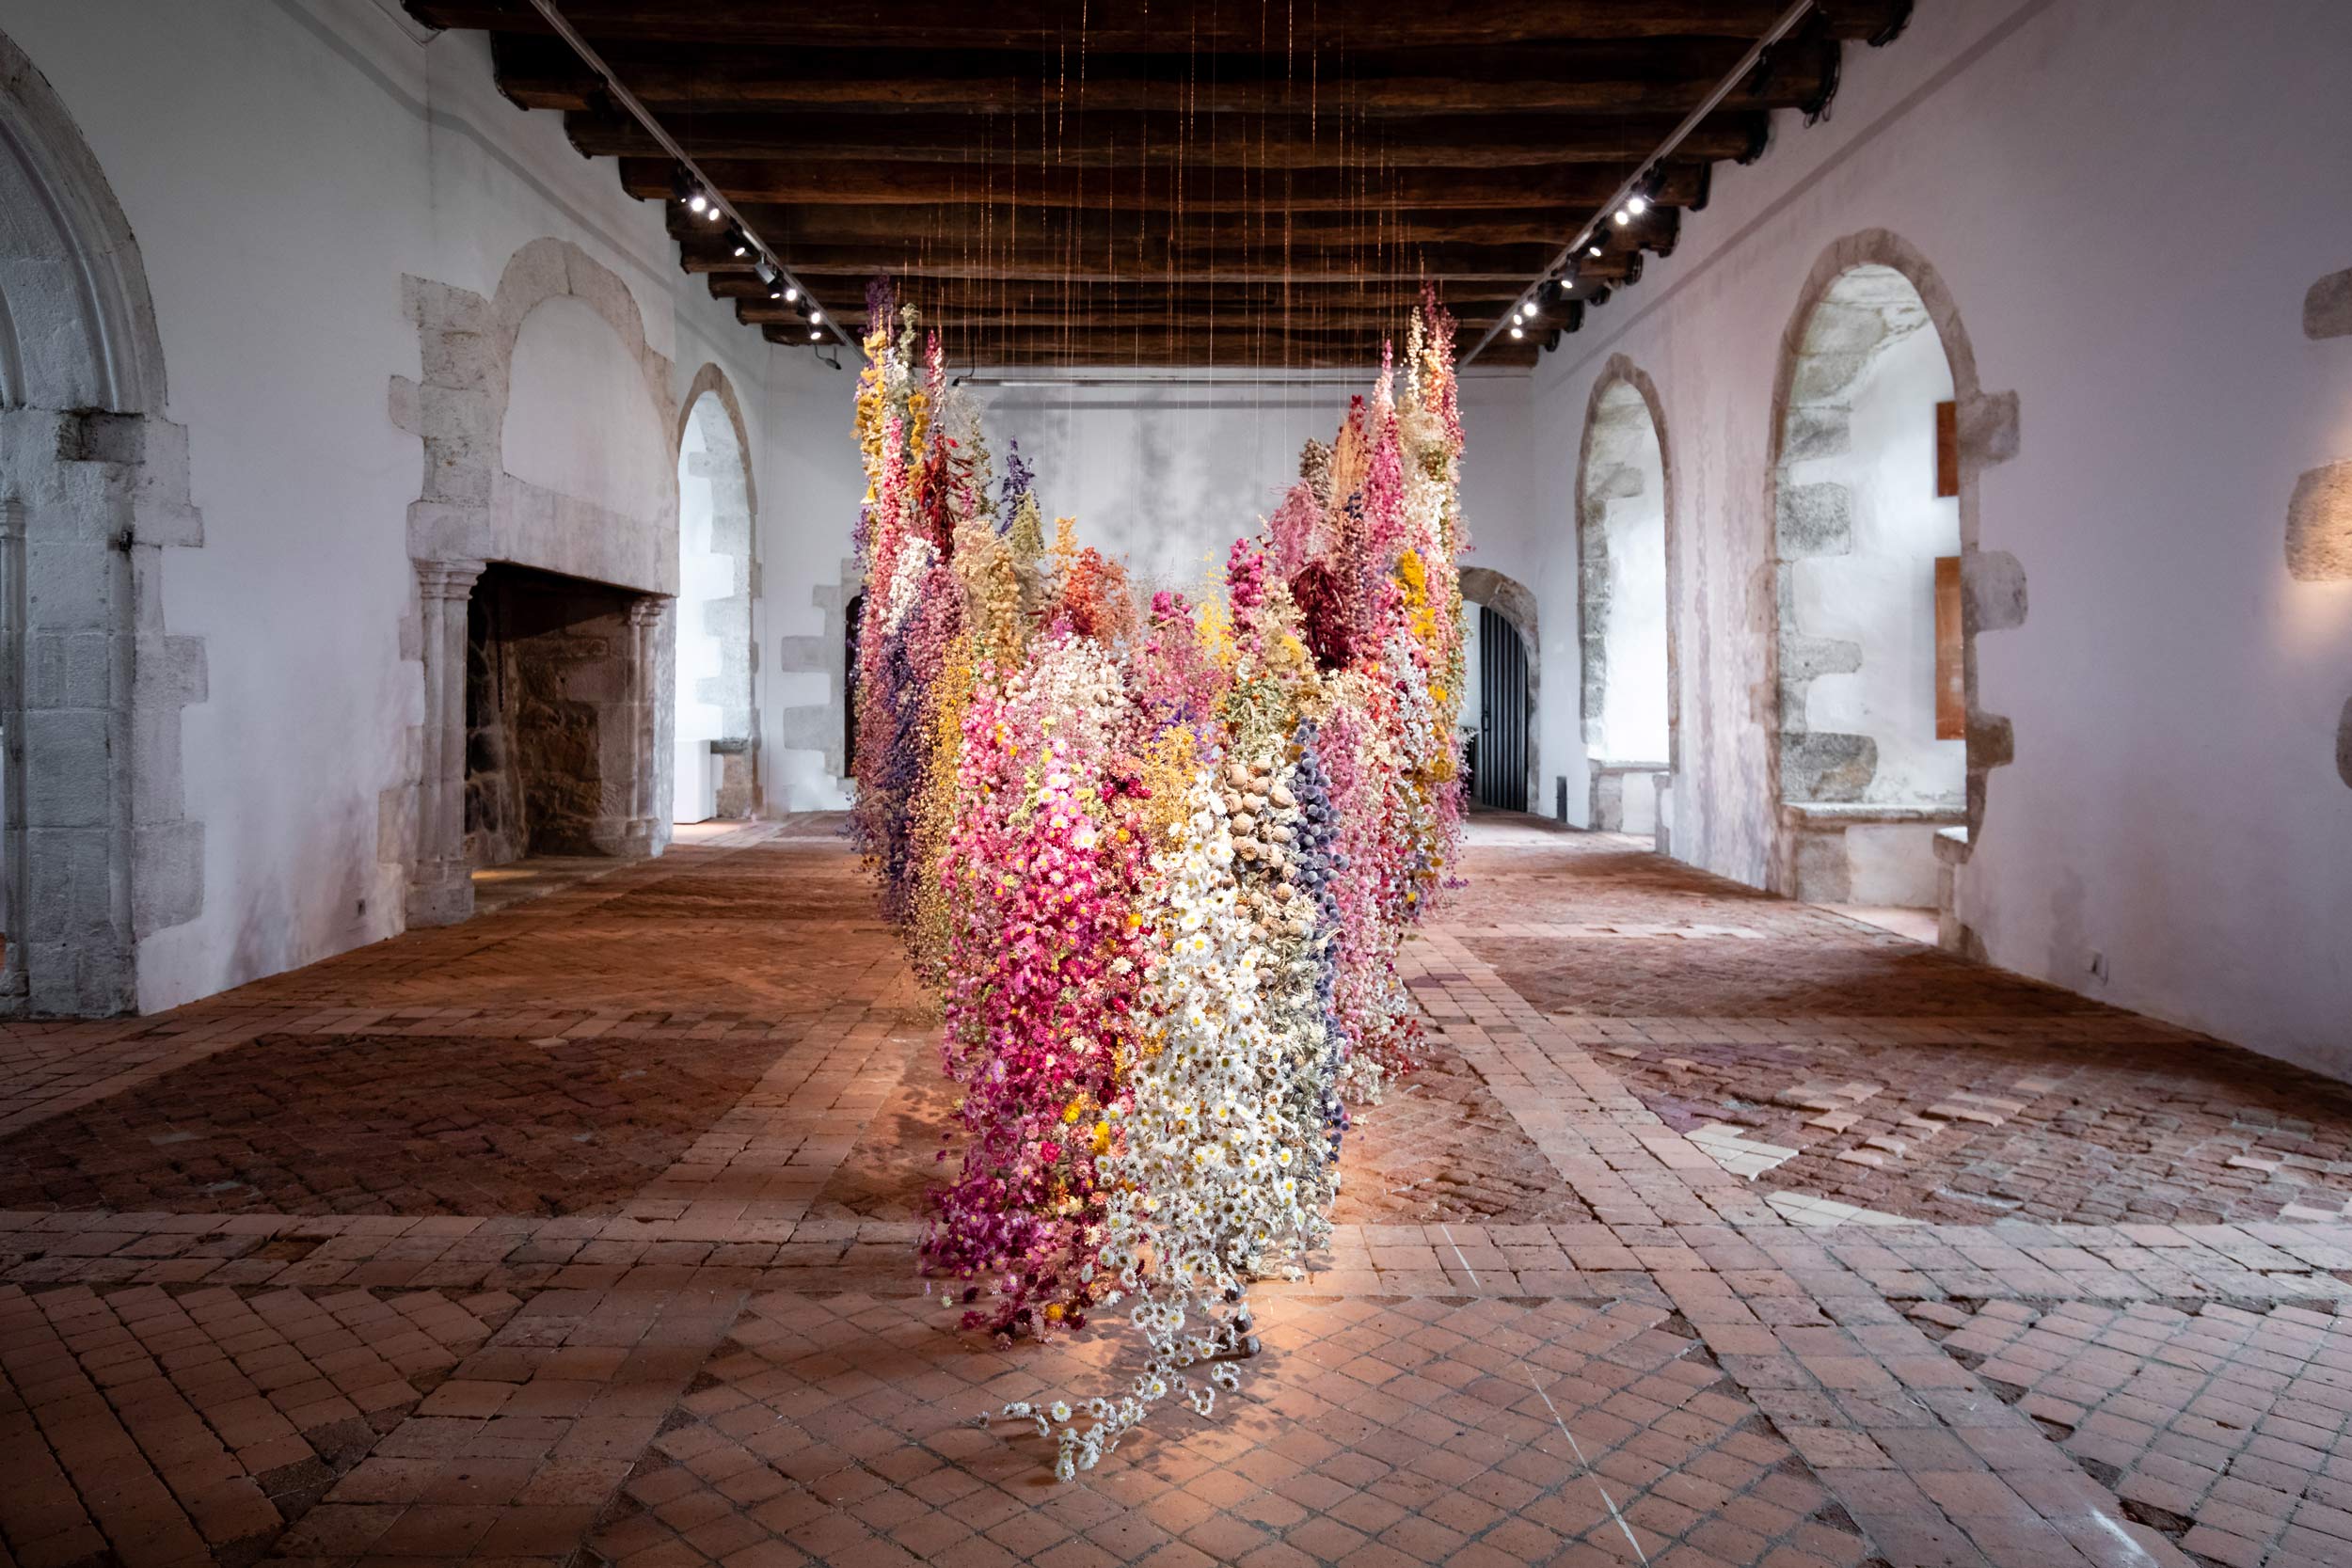 An installation by Rebecca Louise Law made of flowers in the interior of a French château.